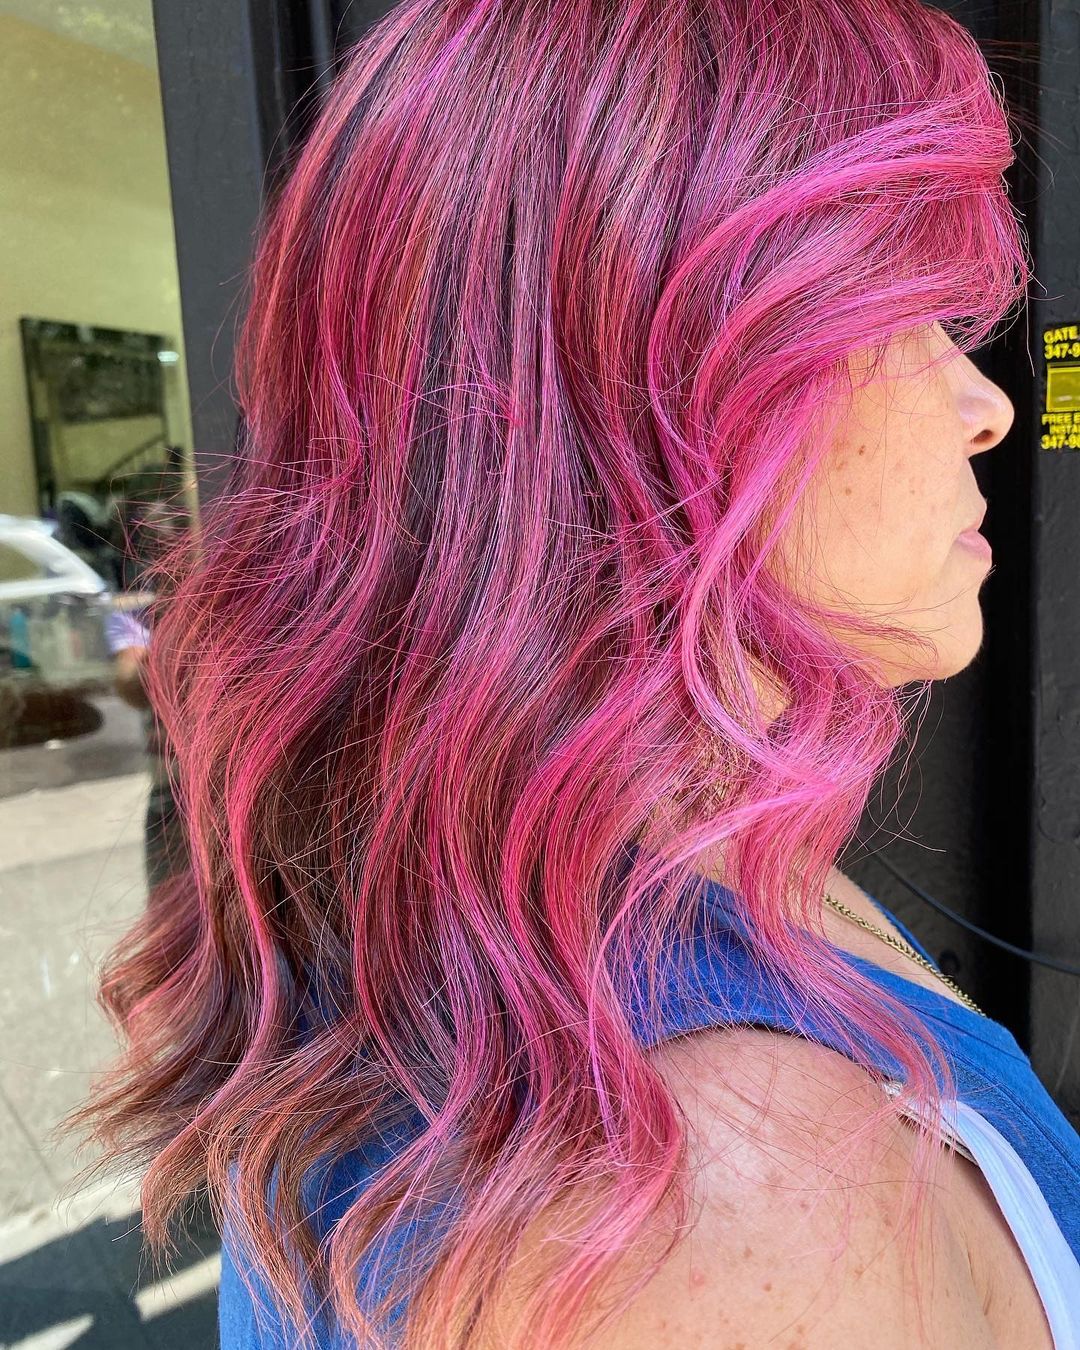 pink ombre hair color 148 Ombre pink hair blonde | Pastel pink ombre hair | Pink balayage Hair Pink Ombre Hair Color for Women